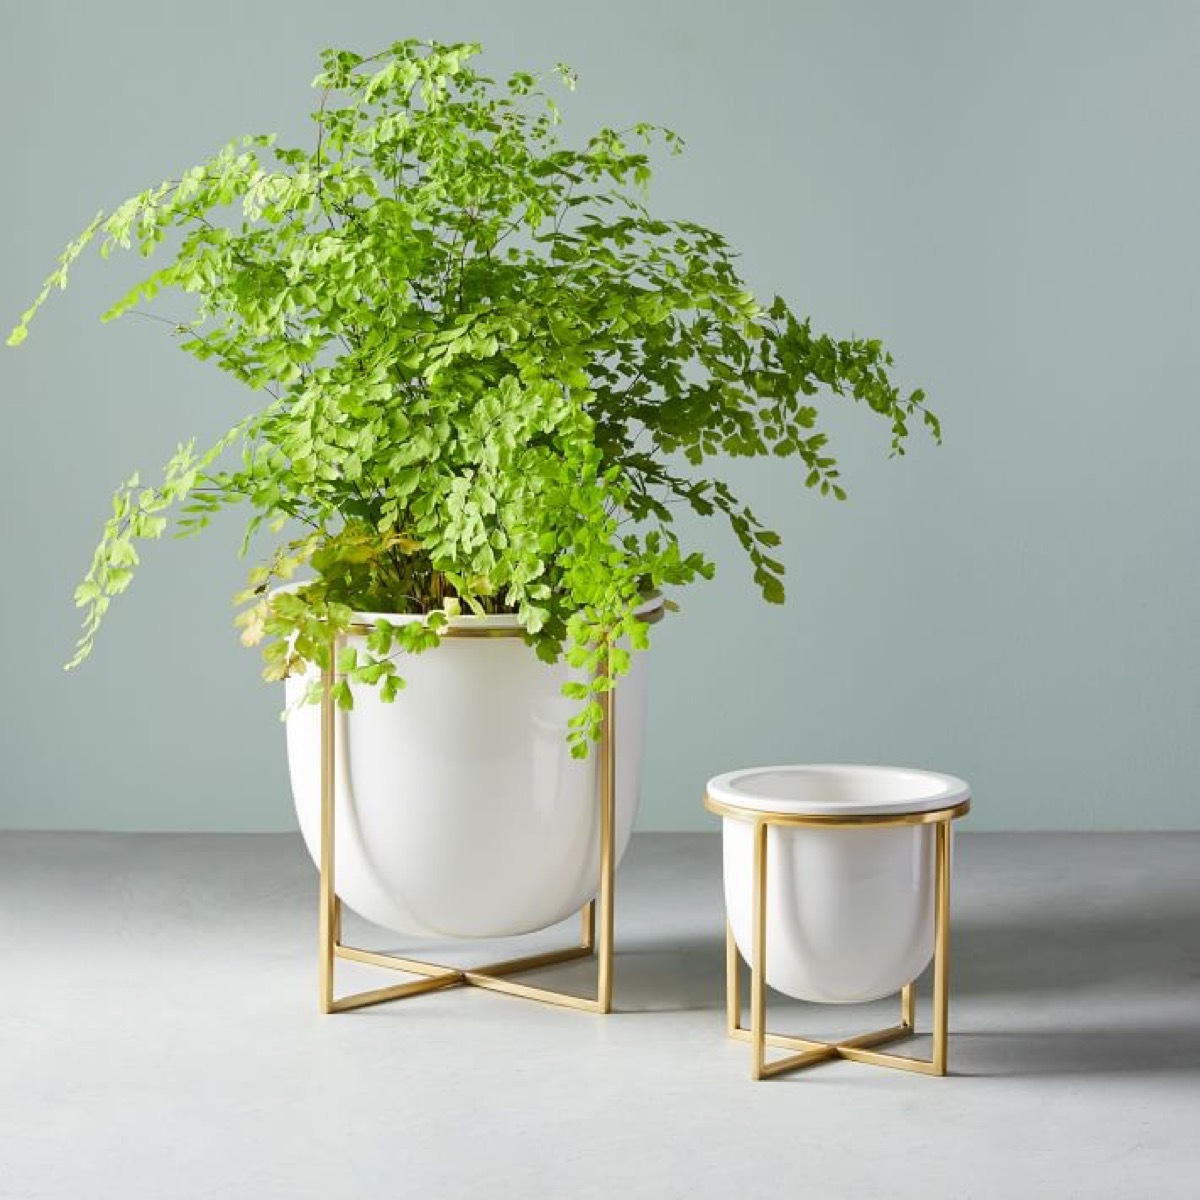 Ceramic and brass planters with plant